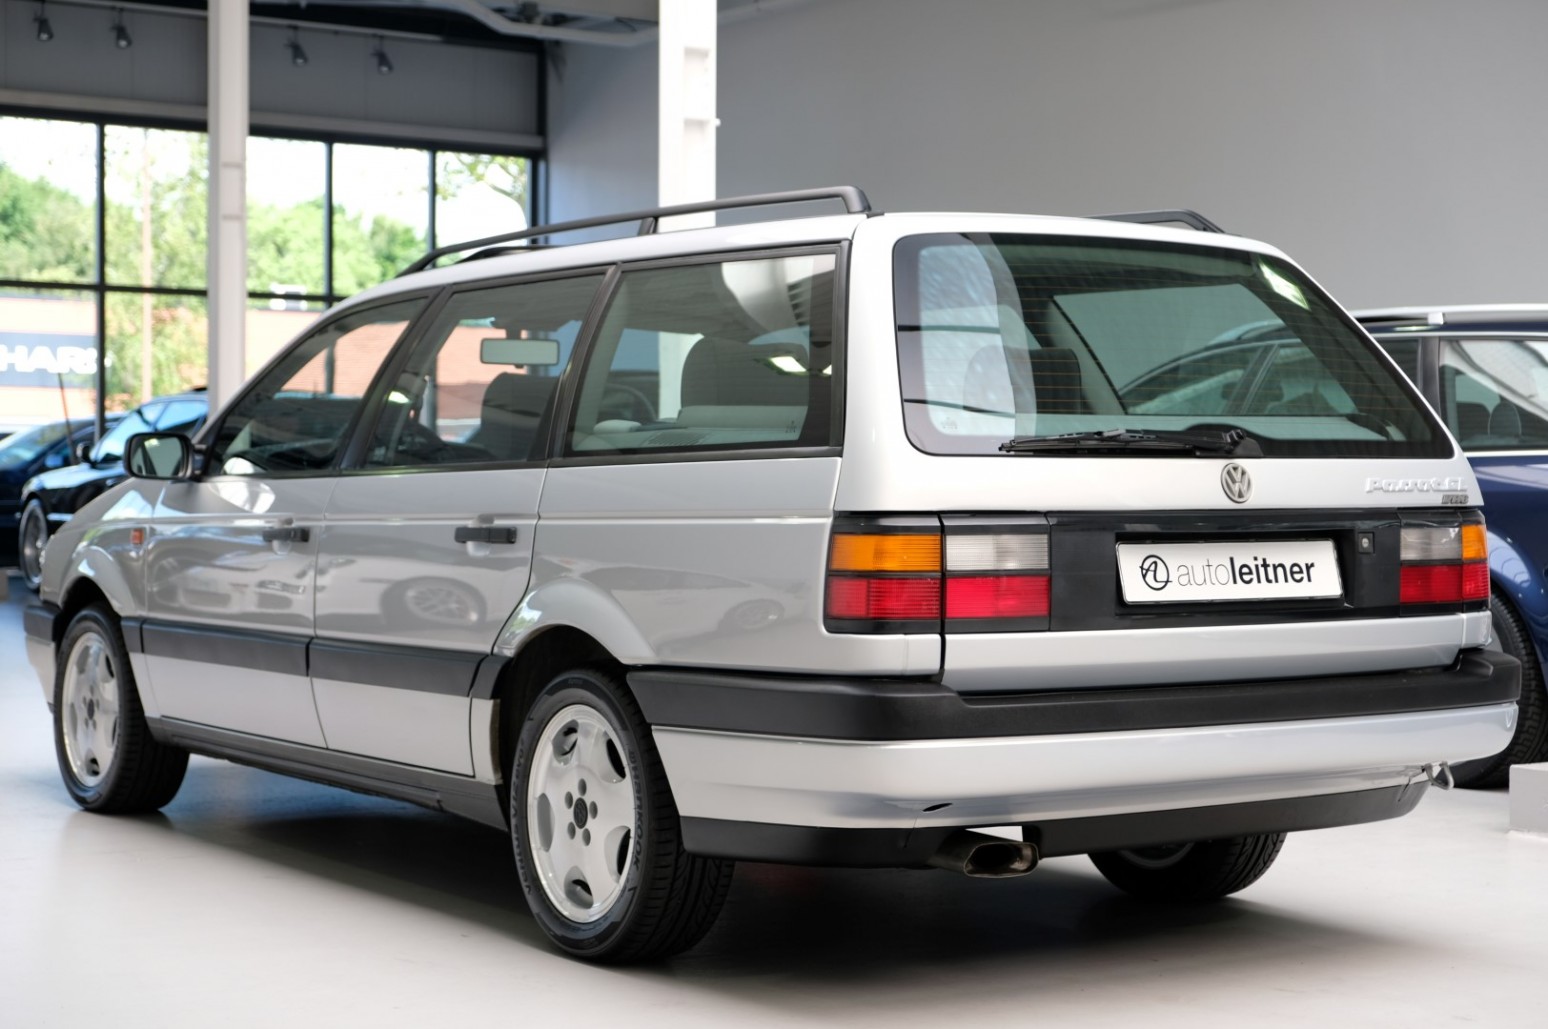 1992 VW Passat Variant 2.8 VR6 Is The Sleeper Wagon You Can Afford | Carscoops